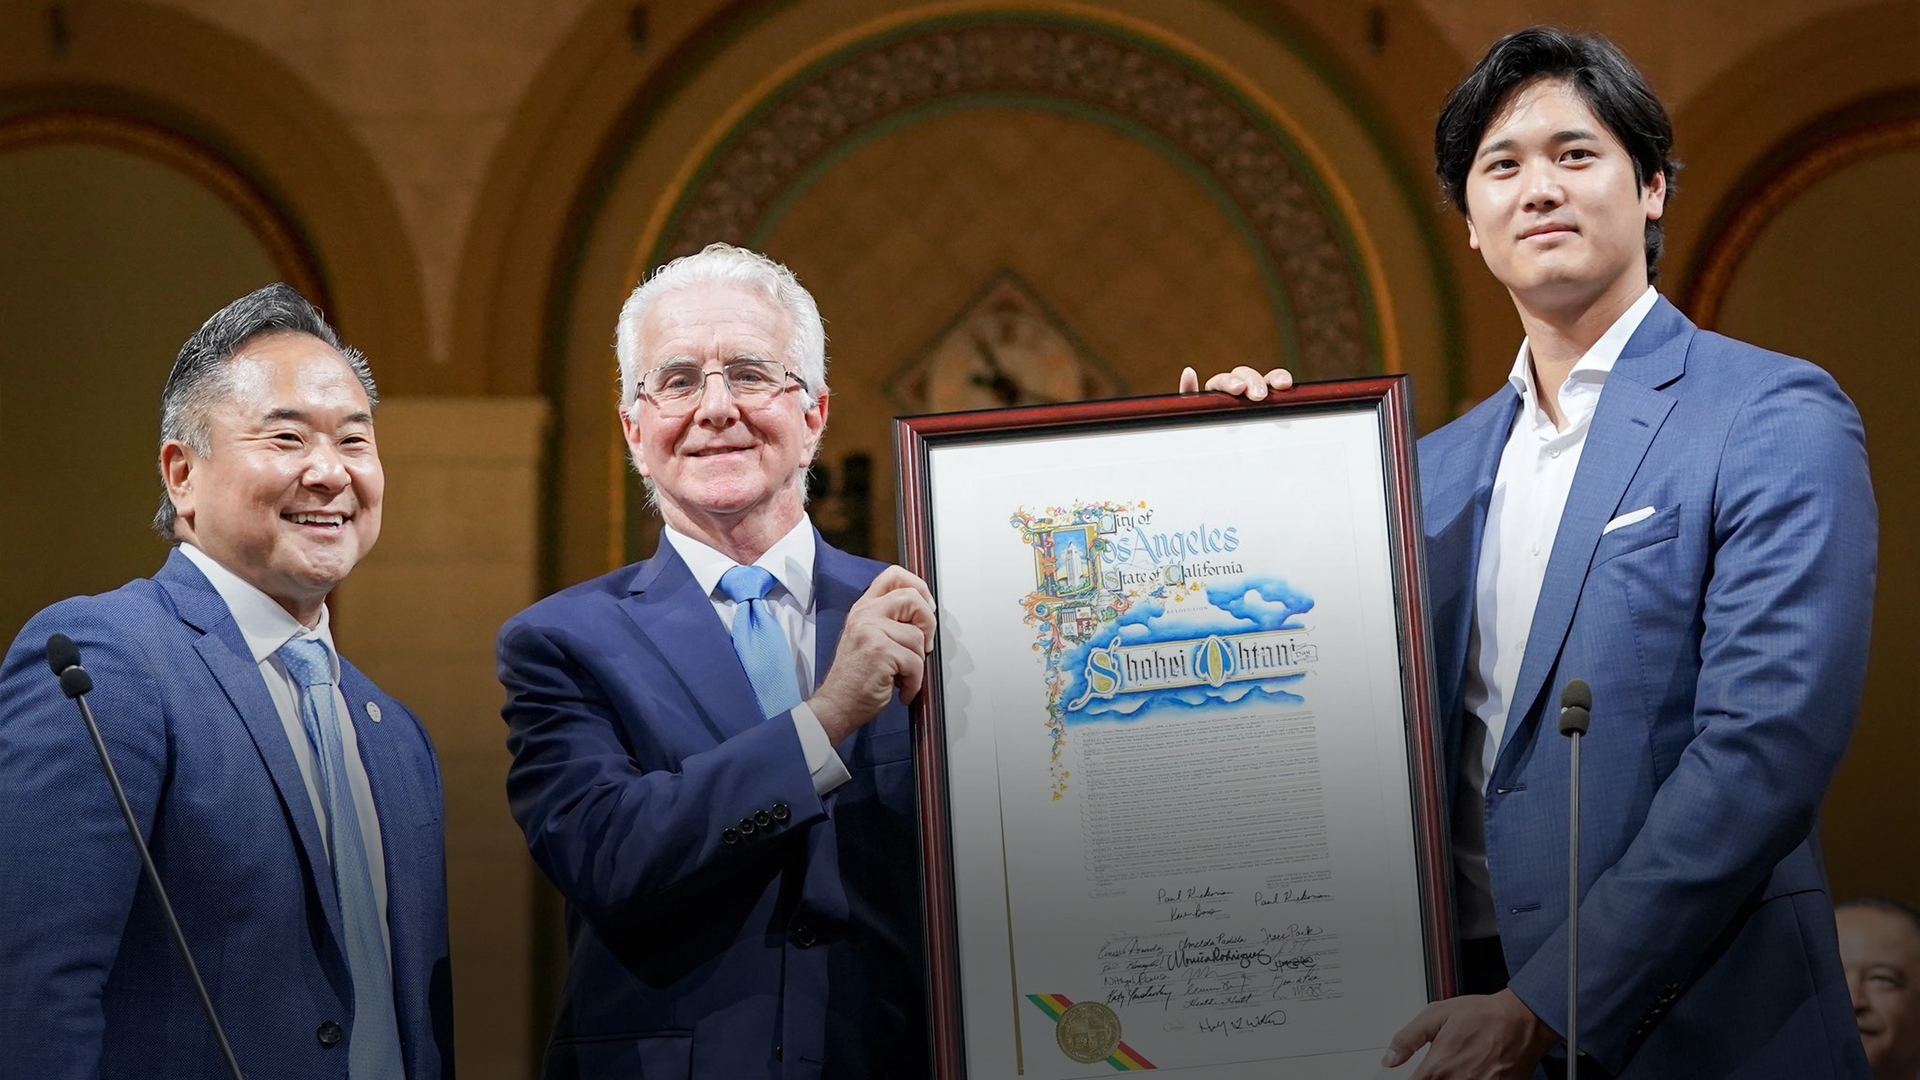 Los Angeles declares May 17 as Shohei Ohtani Day